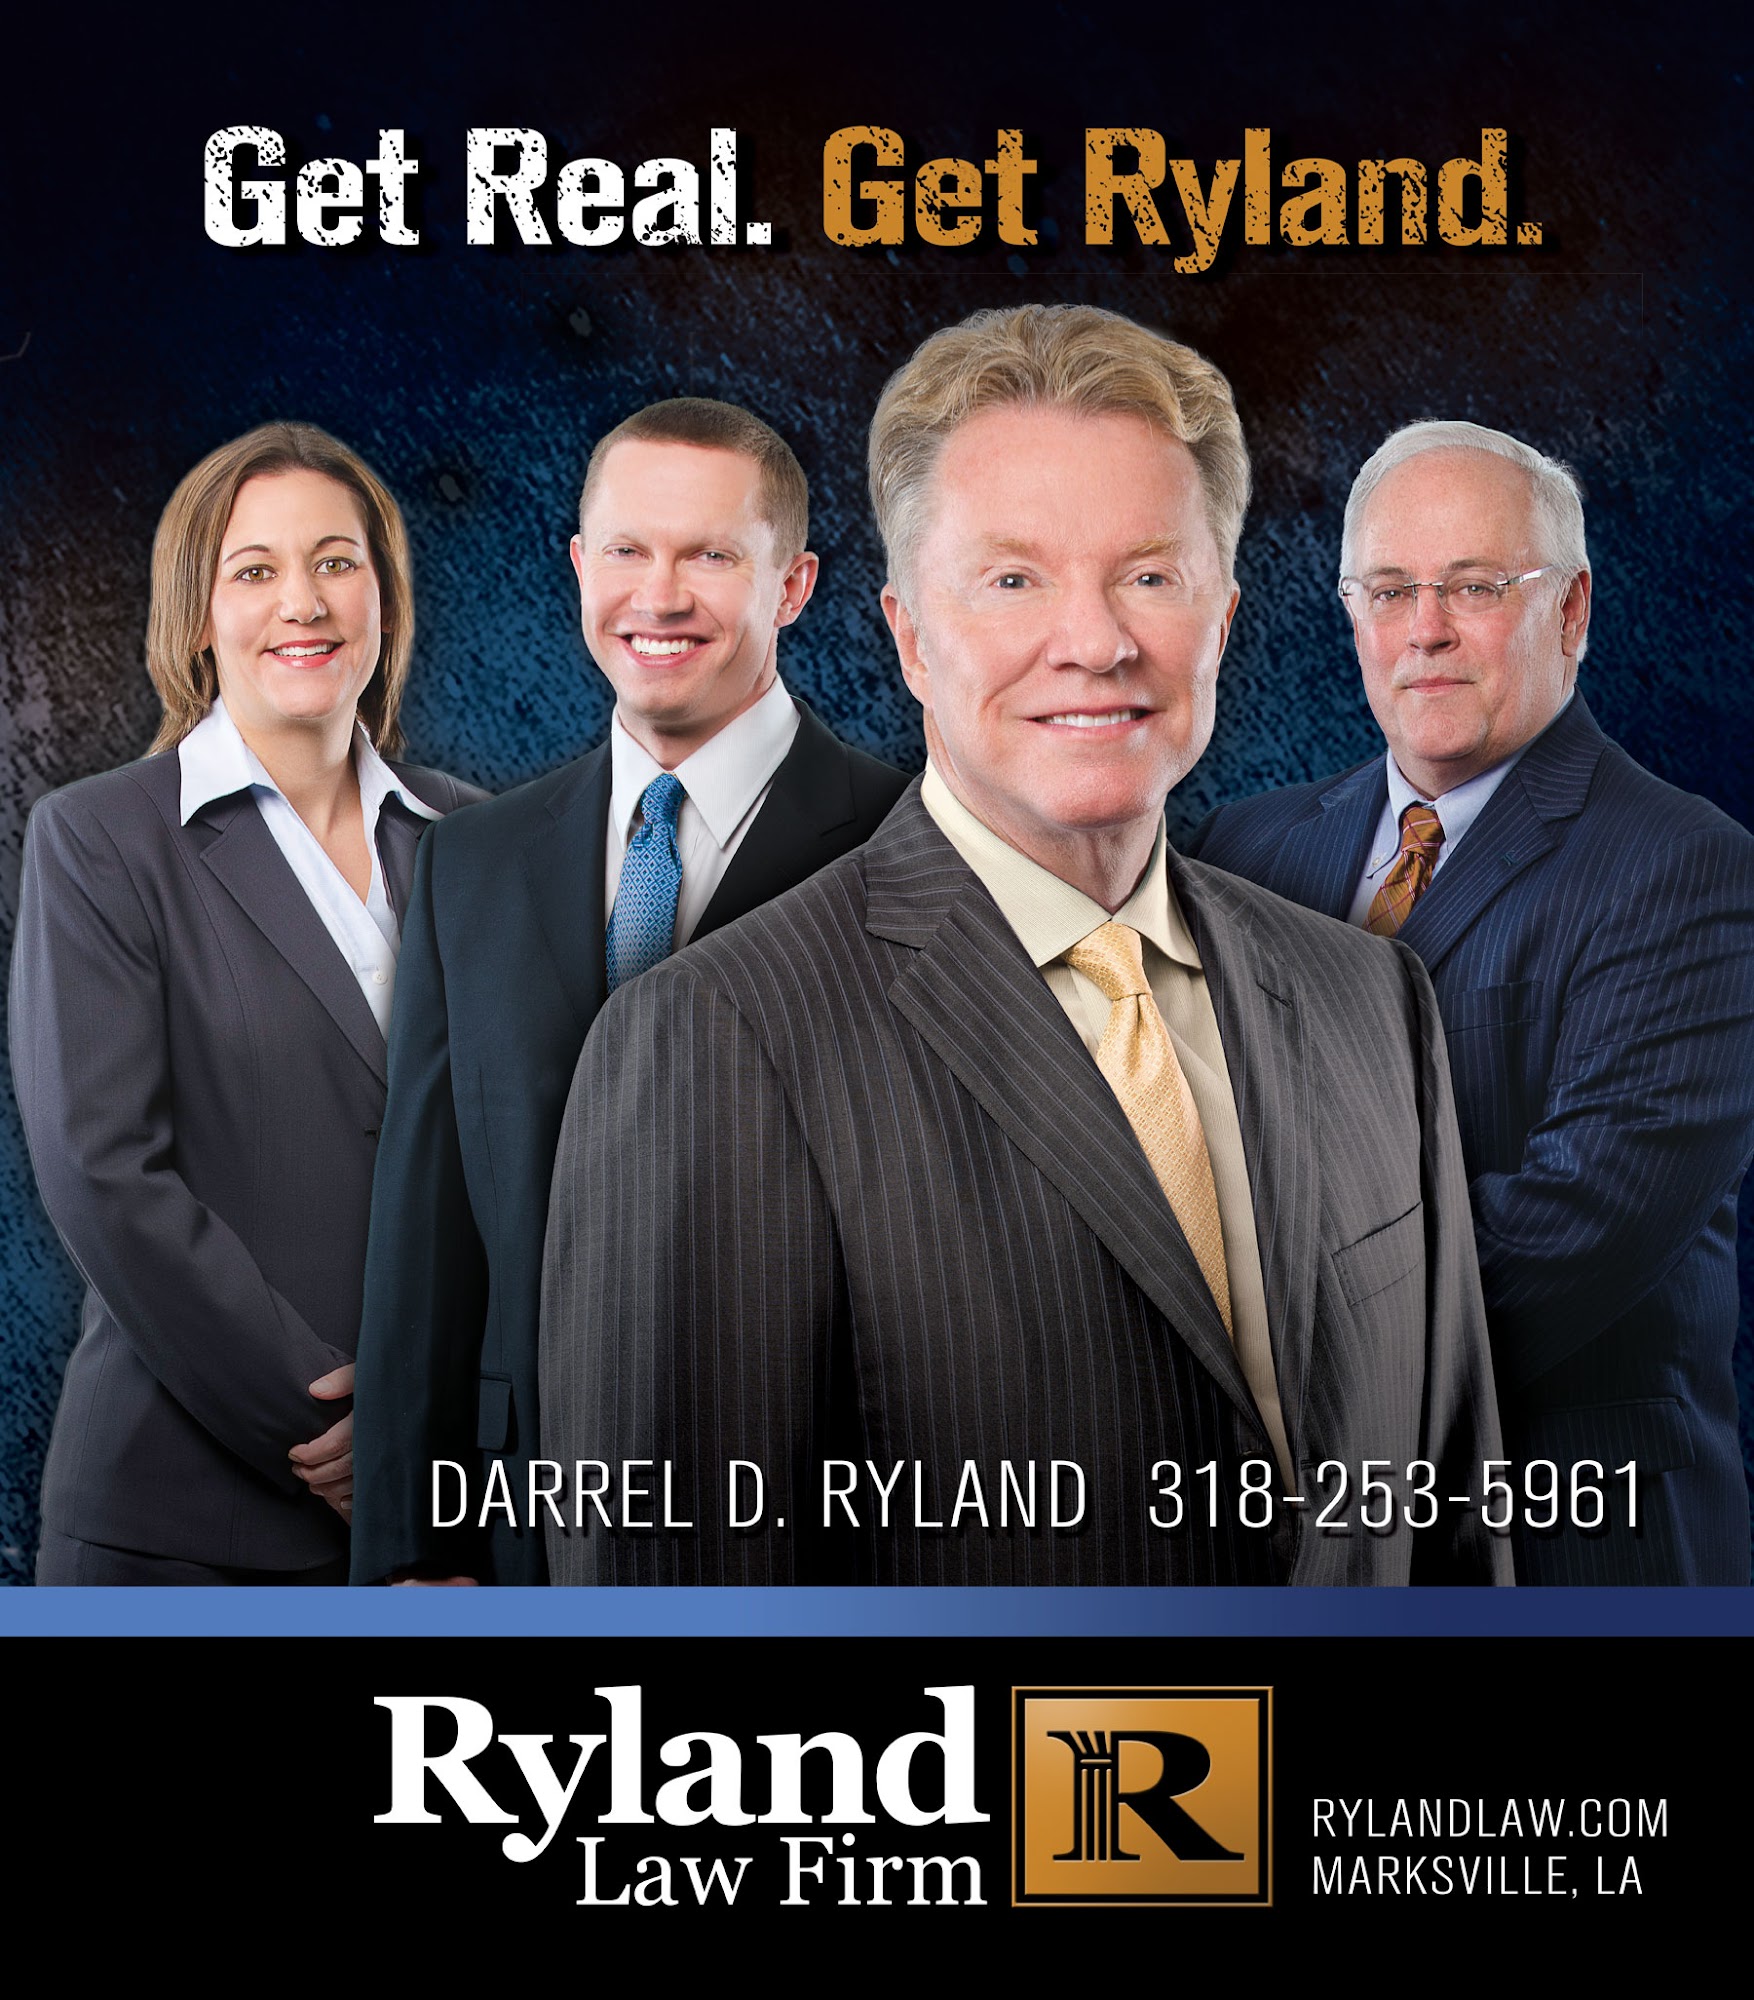 The Ryland Law Firm 115 W Mark St, Marksville Louisiana 71351